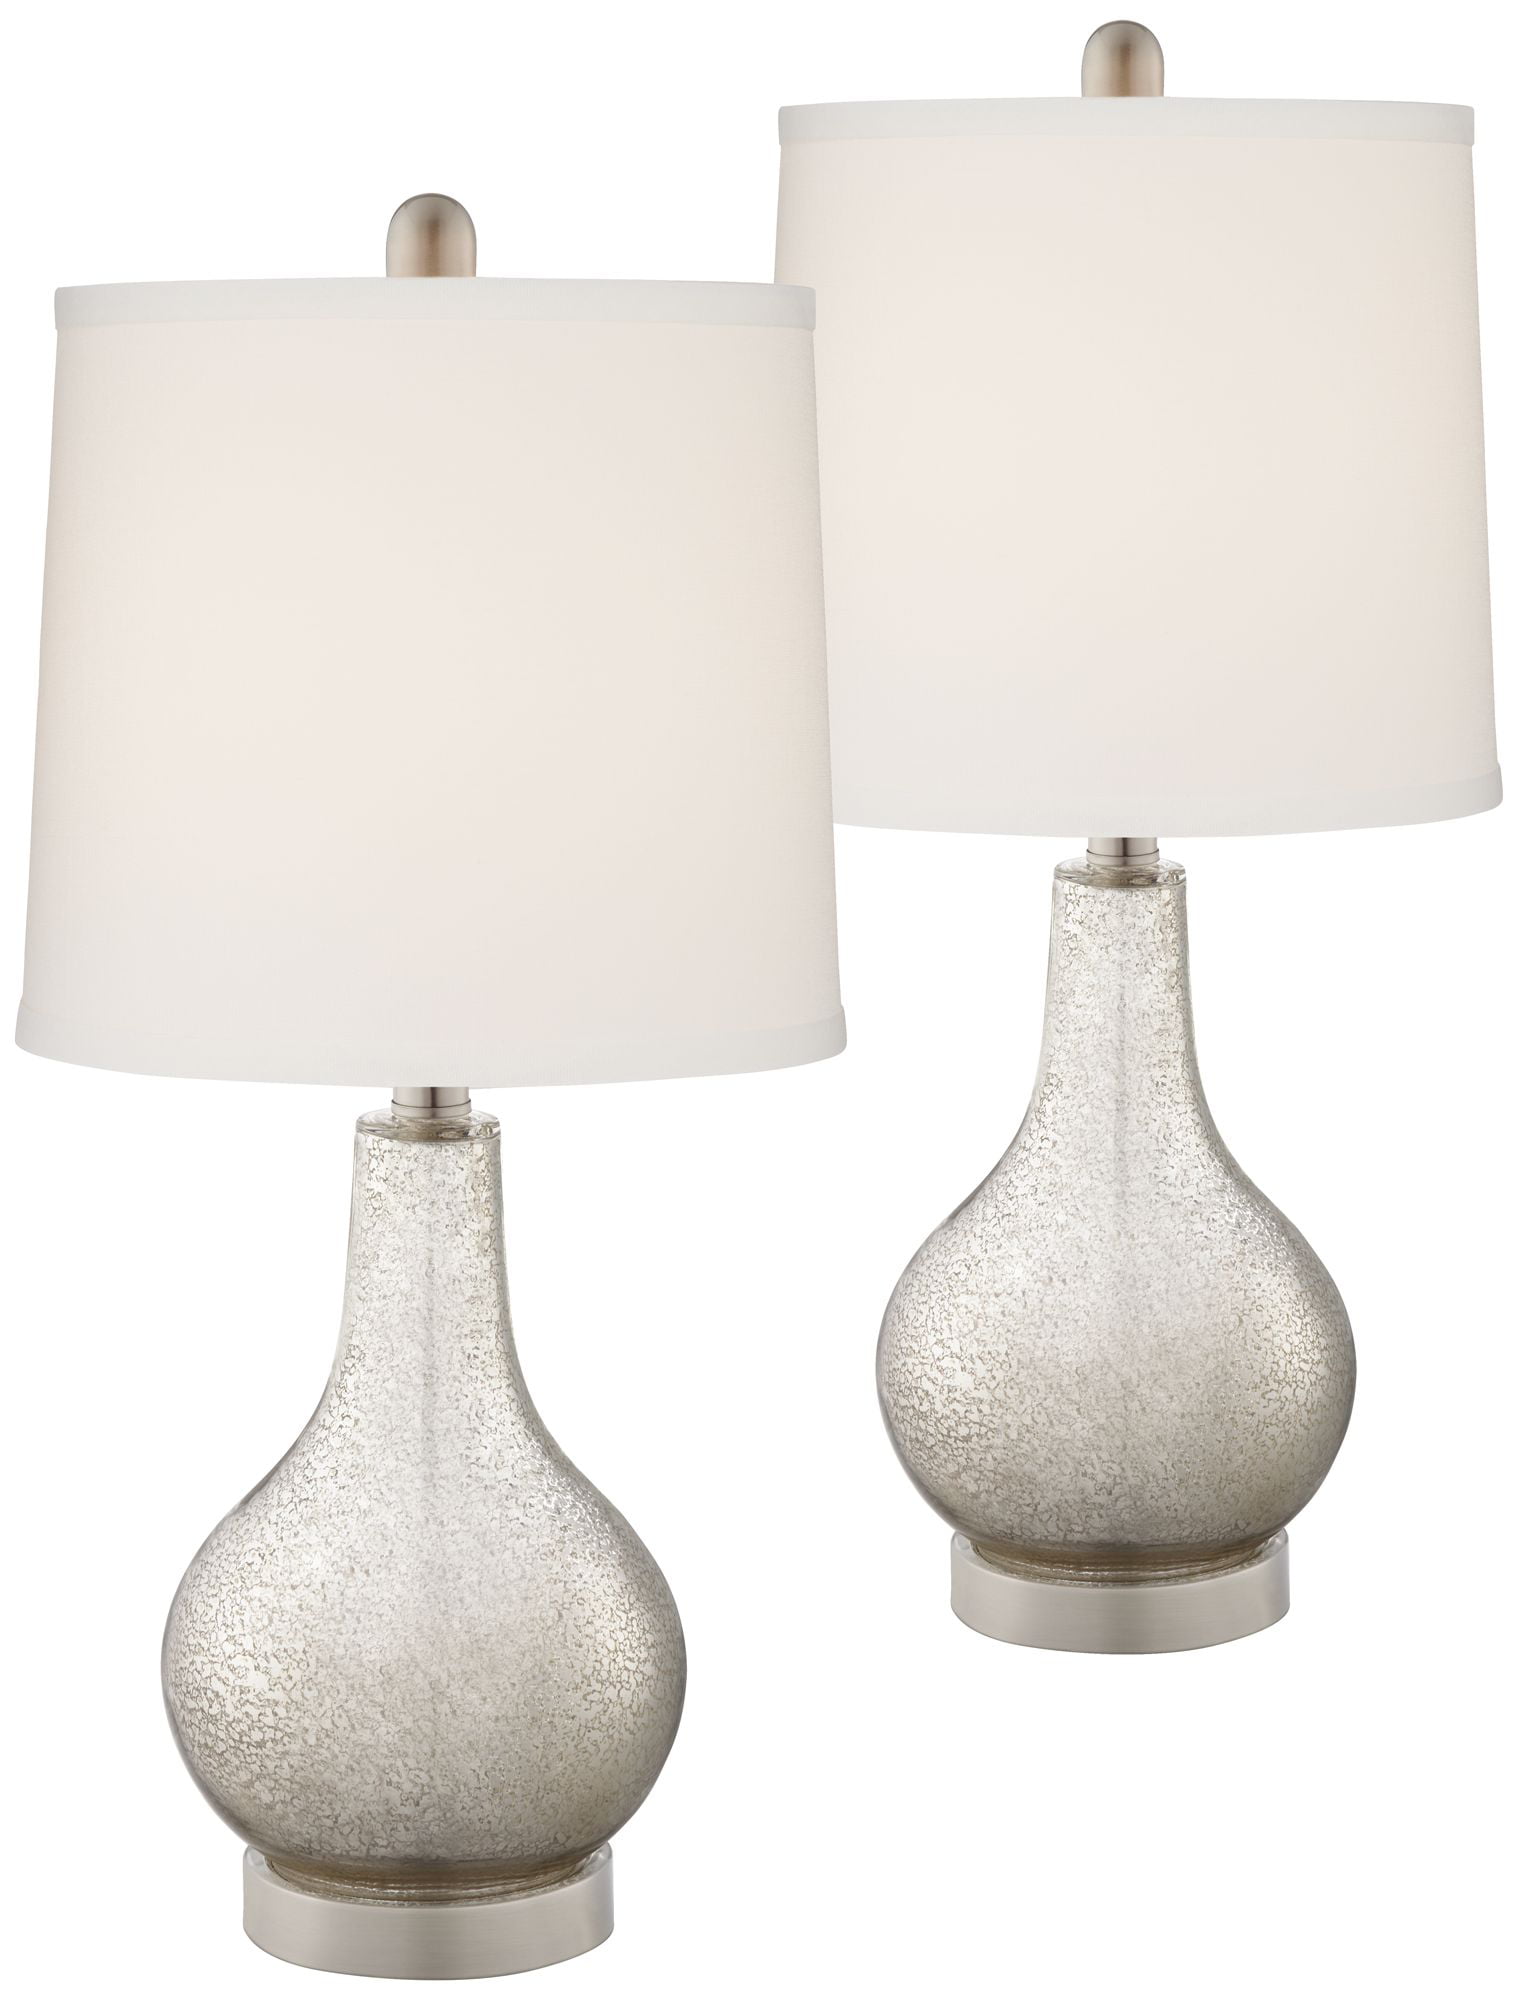 LAMPS A PAIR 29"H HOTEL STYLE  WHITE CERAMIC & CHROME BASE SWITCHED TABLE LAMPS 